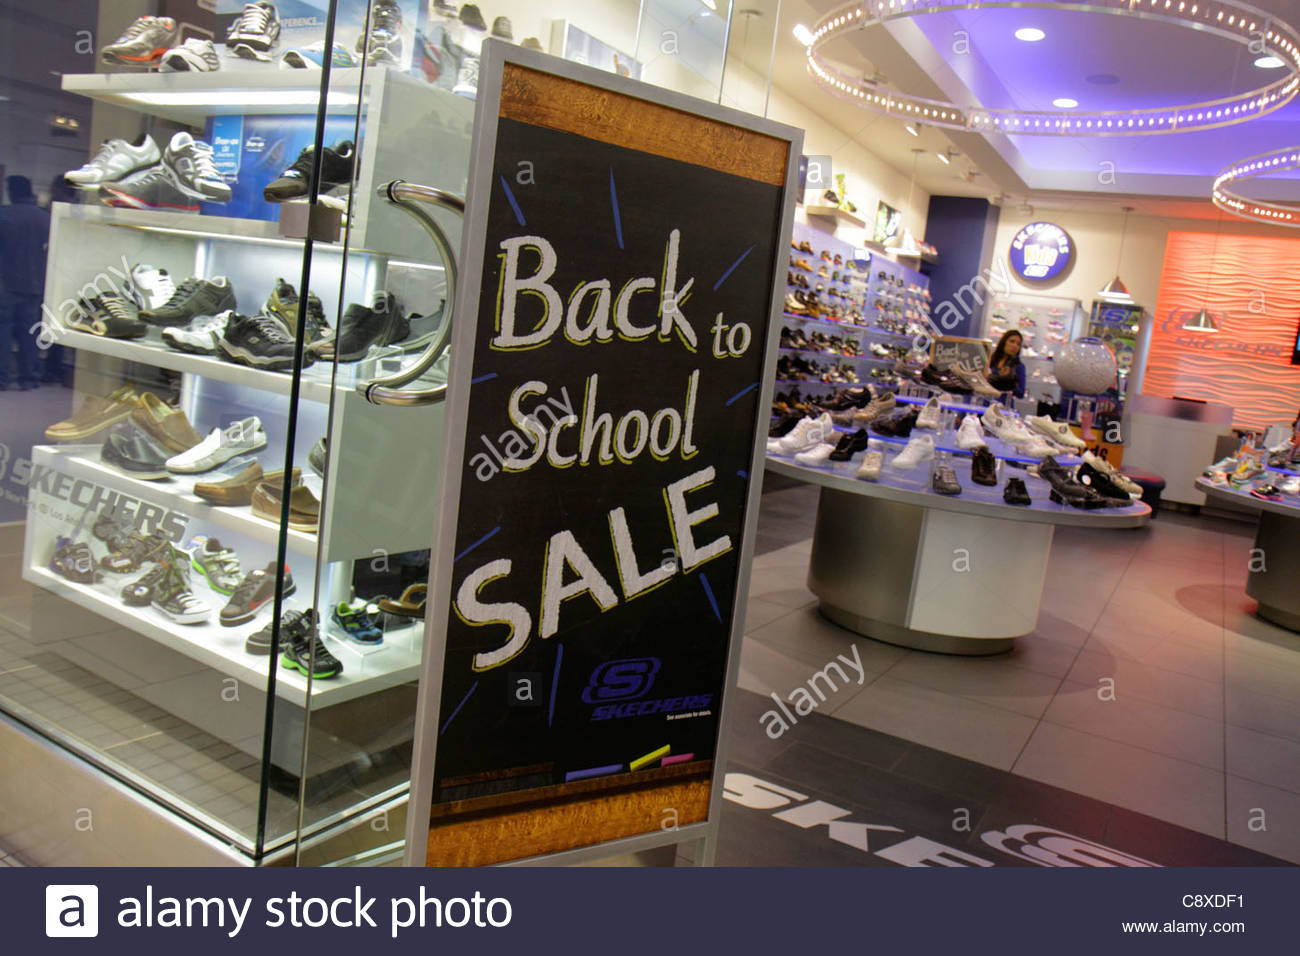 stores that sell skechers